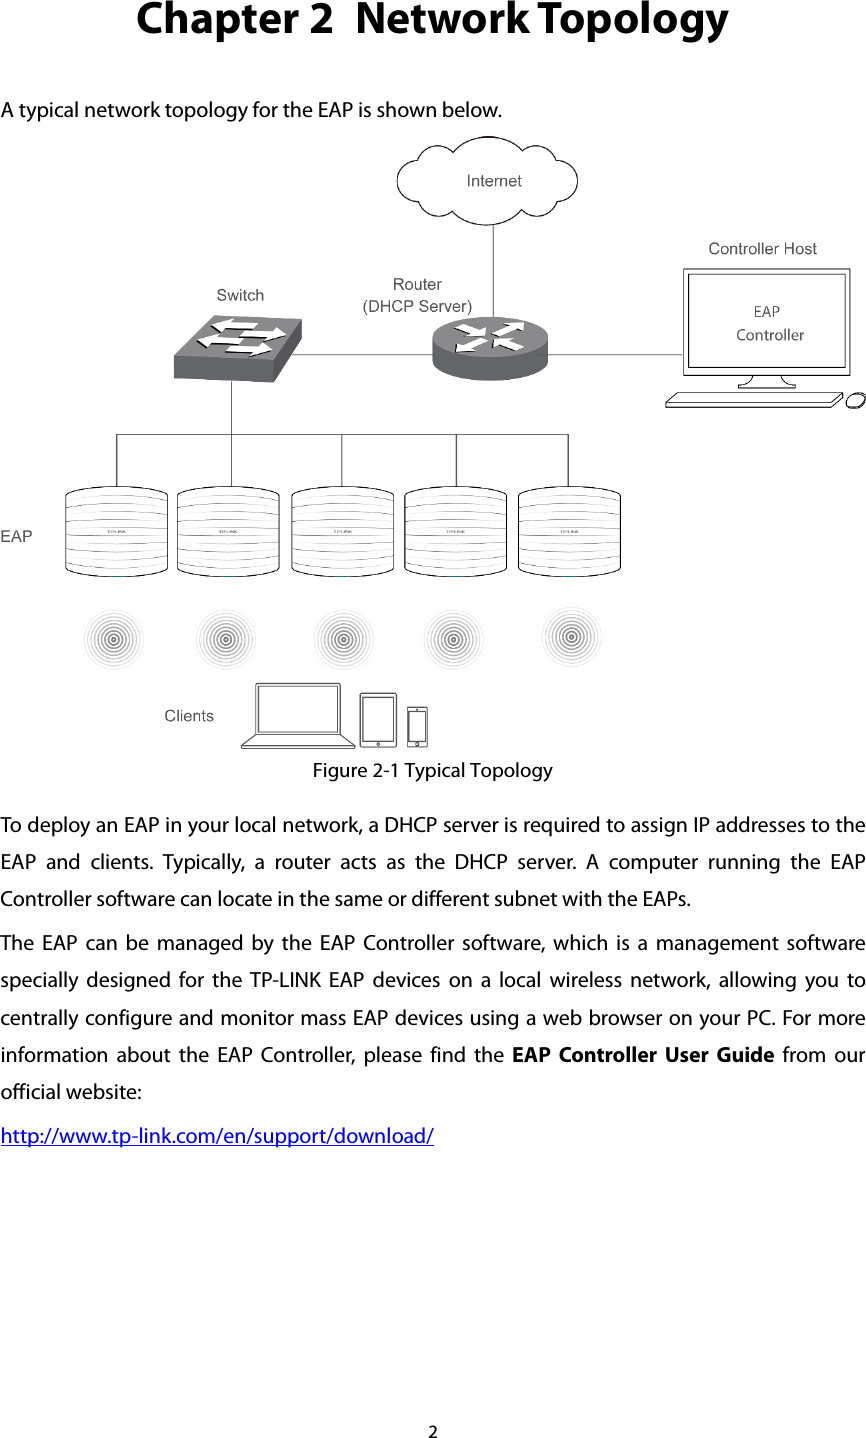 Chapter 2  Network Topology A typical network topology for the EAP is shown below.             Figure 2-1 Typical Topology To deploy an EAP in your local network, a DHCP server is required to assign IP addresses to the EAP and clients. Typically, a router acts as the DHCP server. A computer running the EAP Controller software can locate in the same or different subnet with the EAPs. The EAP can be managed by the EAP Controller software, which is a management software specially designed for the TP-LINK EAP devices on a local wireless network, allowing you to centrally configure and monitor mass EAP devices using a web browser on your PC. For more information about the EAP Controller, please find  the  EAP Controller User Guide from our official website:   http://www.tp-link.com/en/support/download/     2  